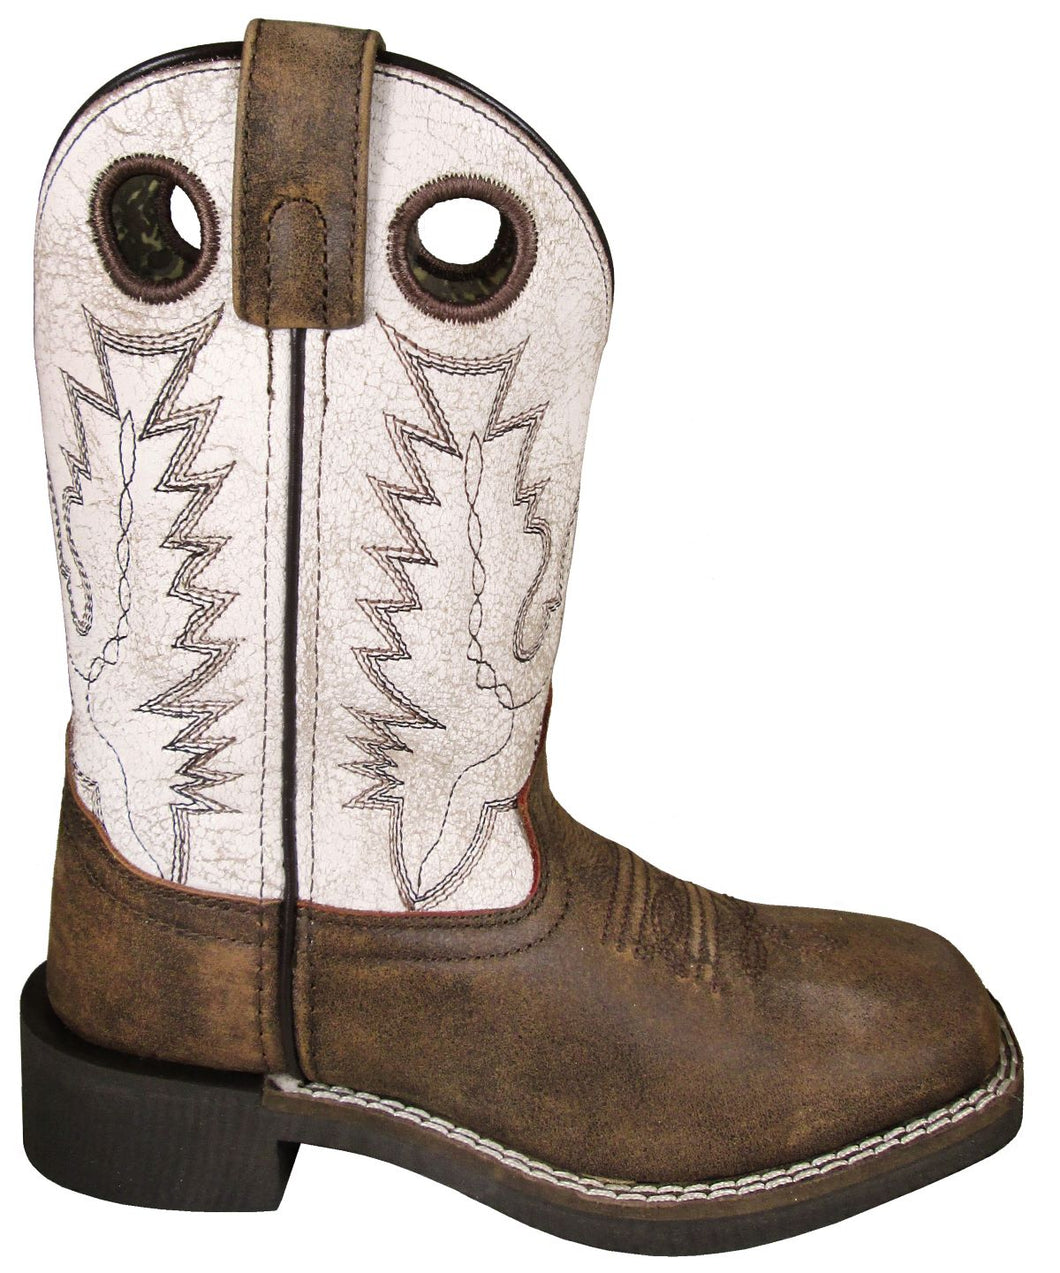 'Smoky Mountain' Youth Drifter Western Square Toe - Brown Distress / Antique White